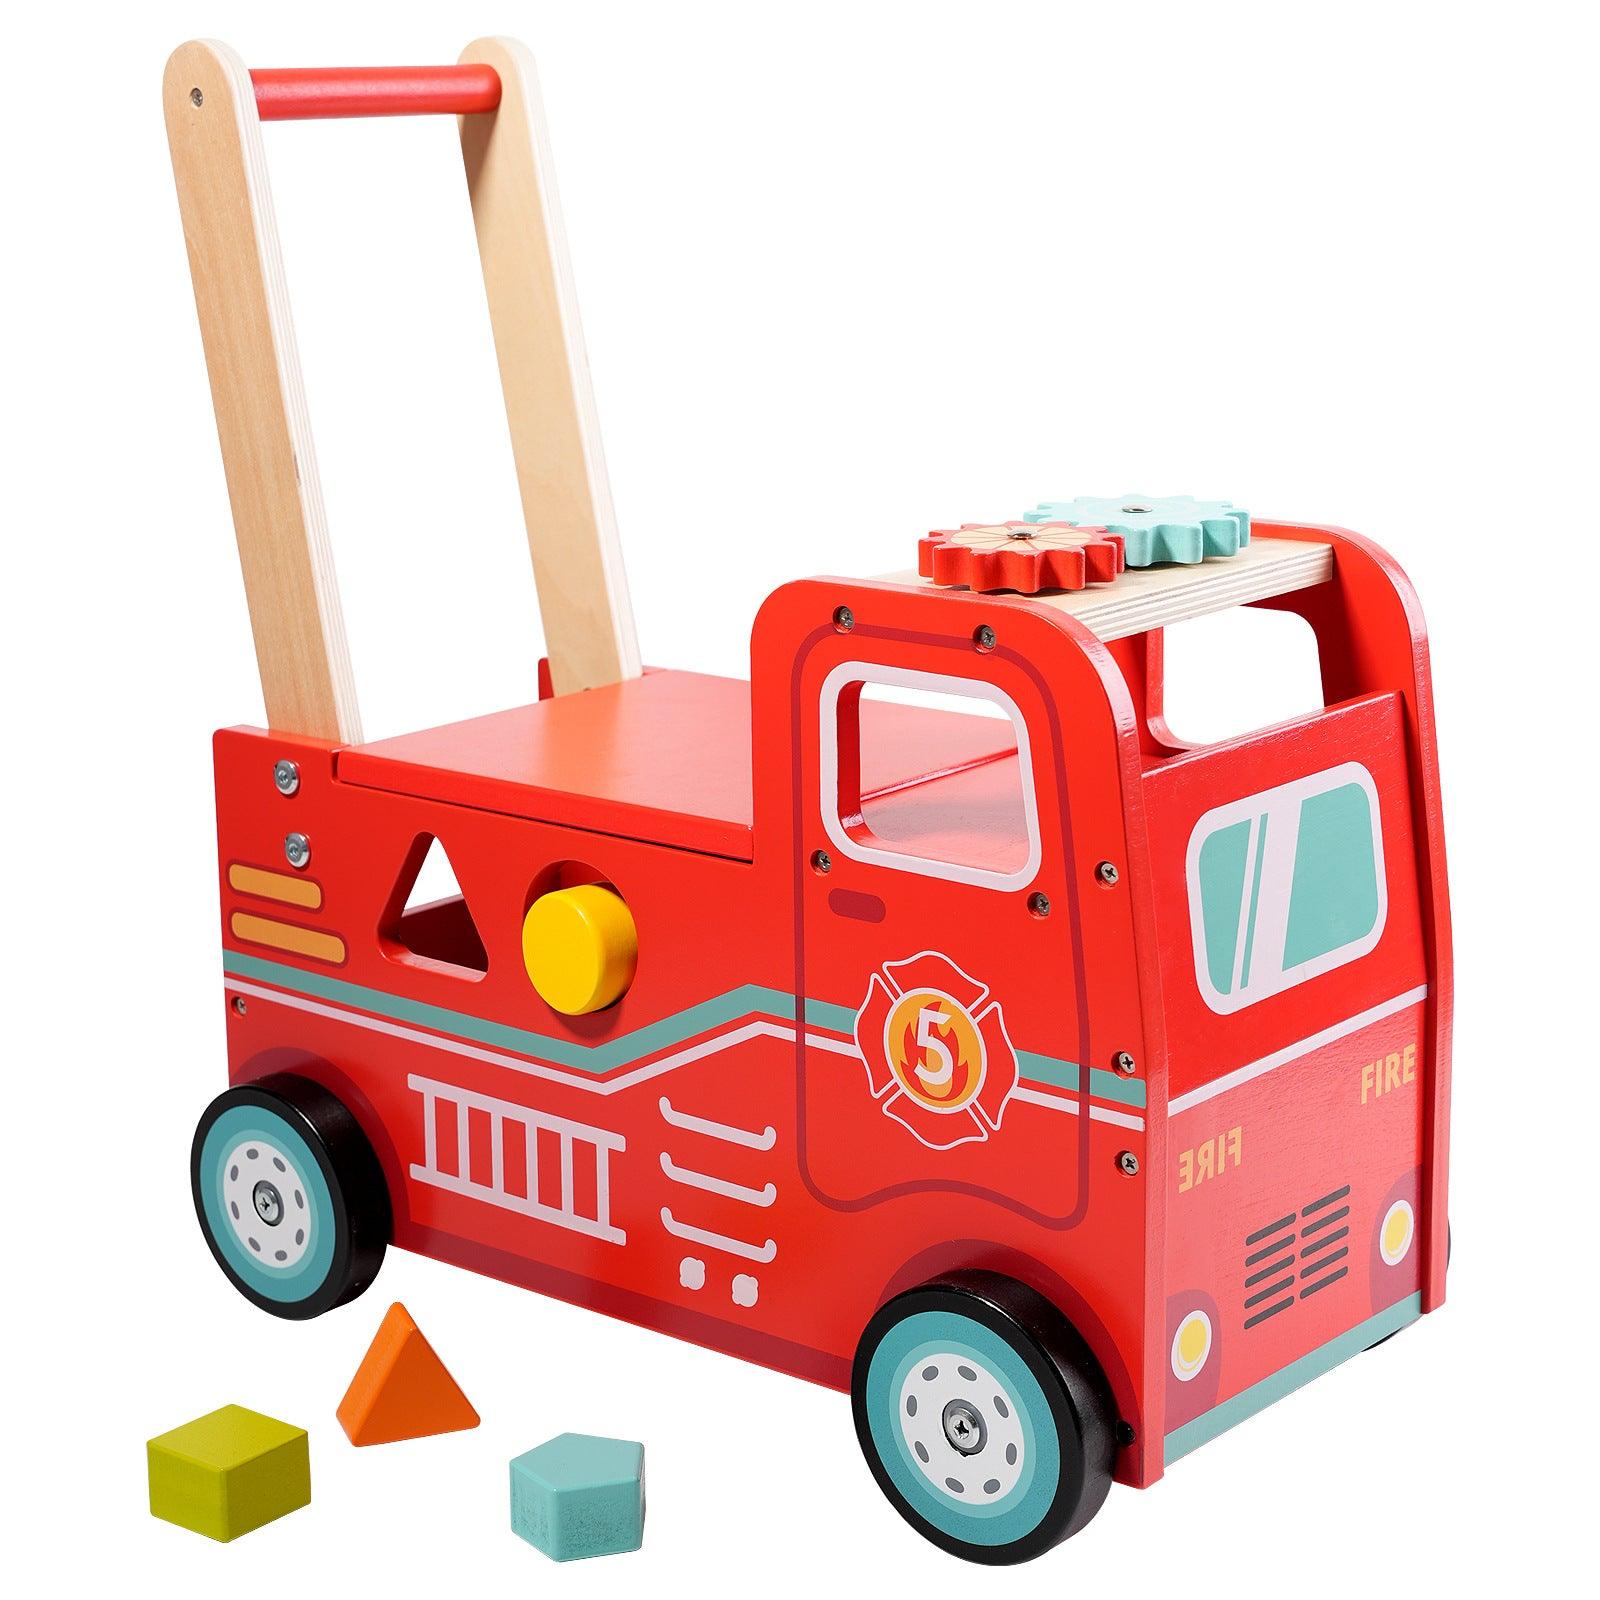 Multipurpose Wooden Baby Walker Ride-On Toy - Fire Engine - Taylorson